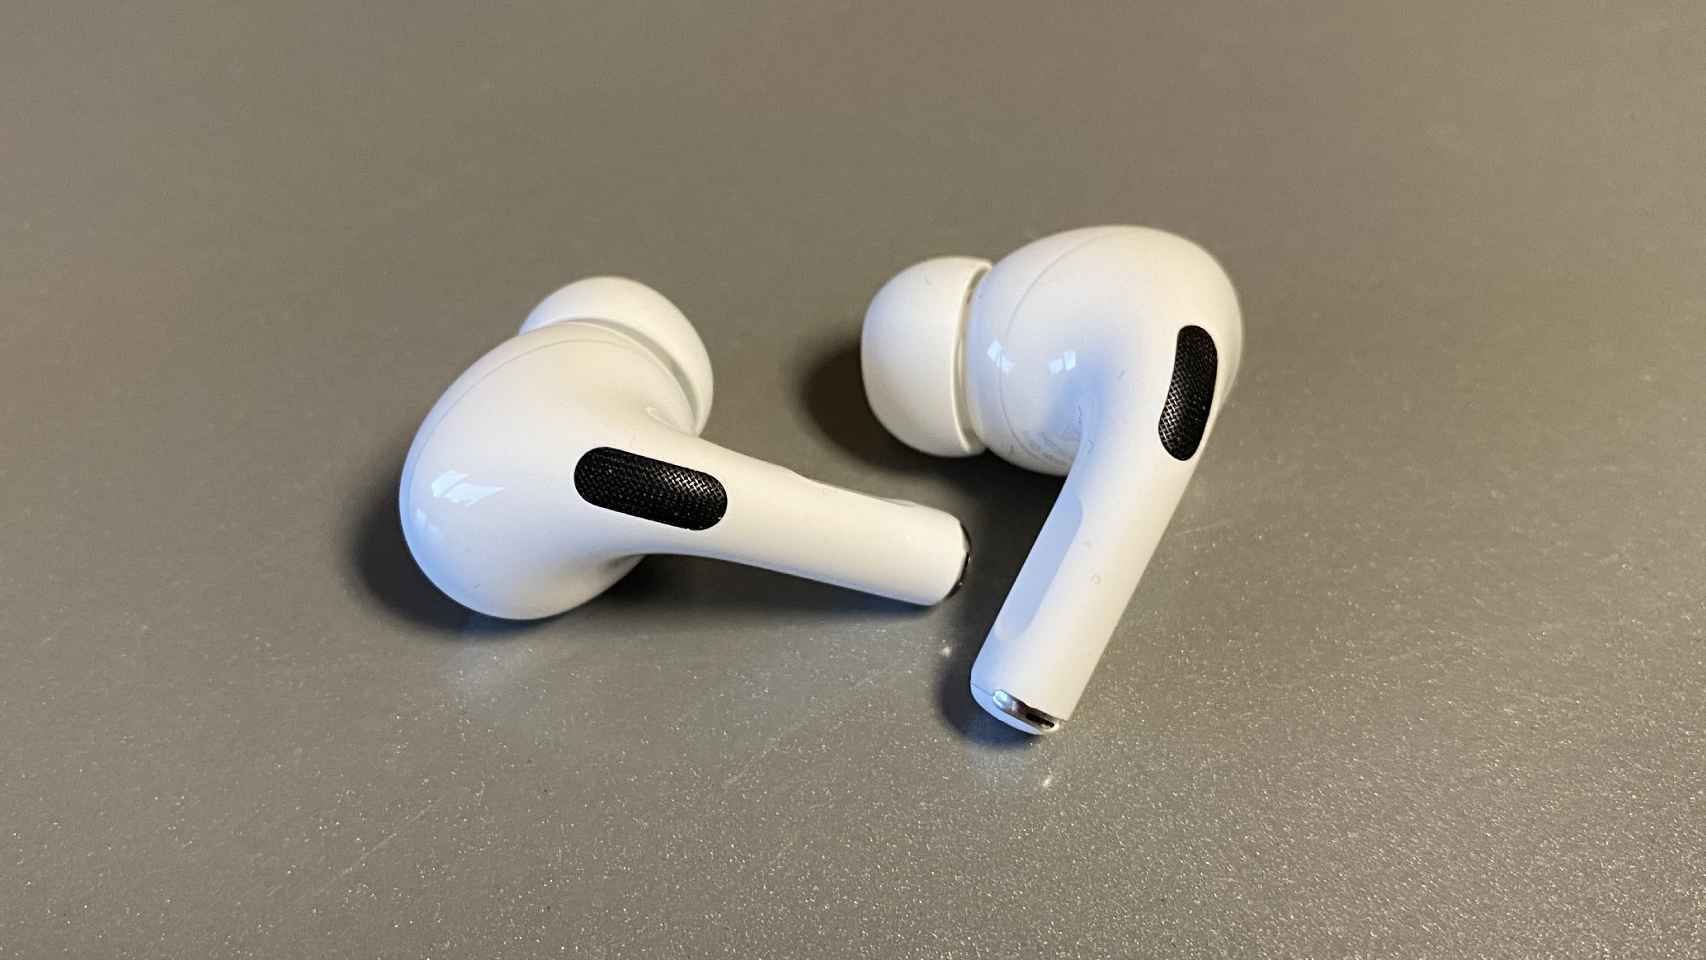 Airpods Pro.